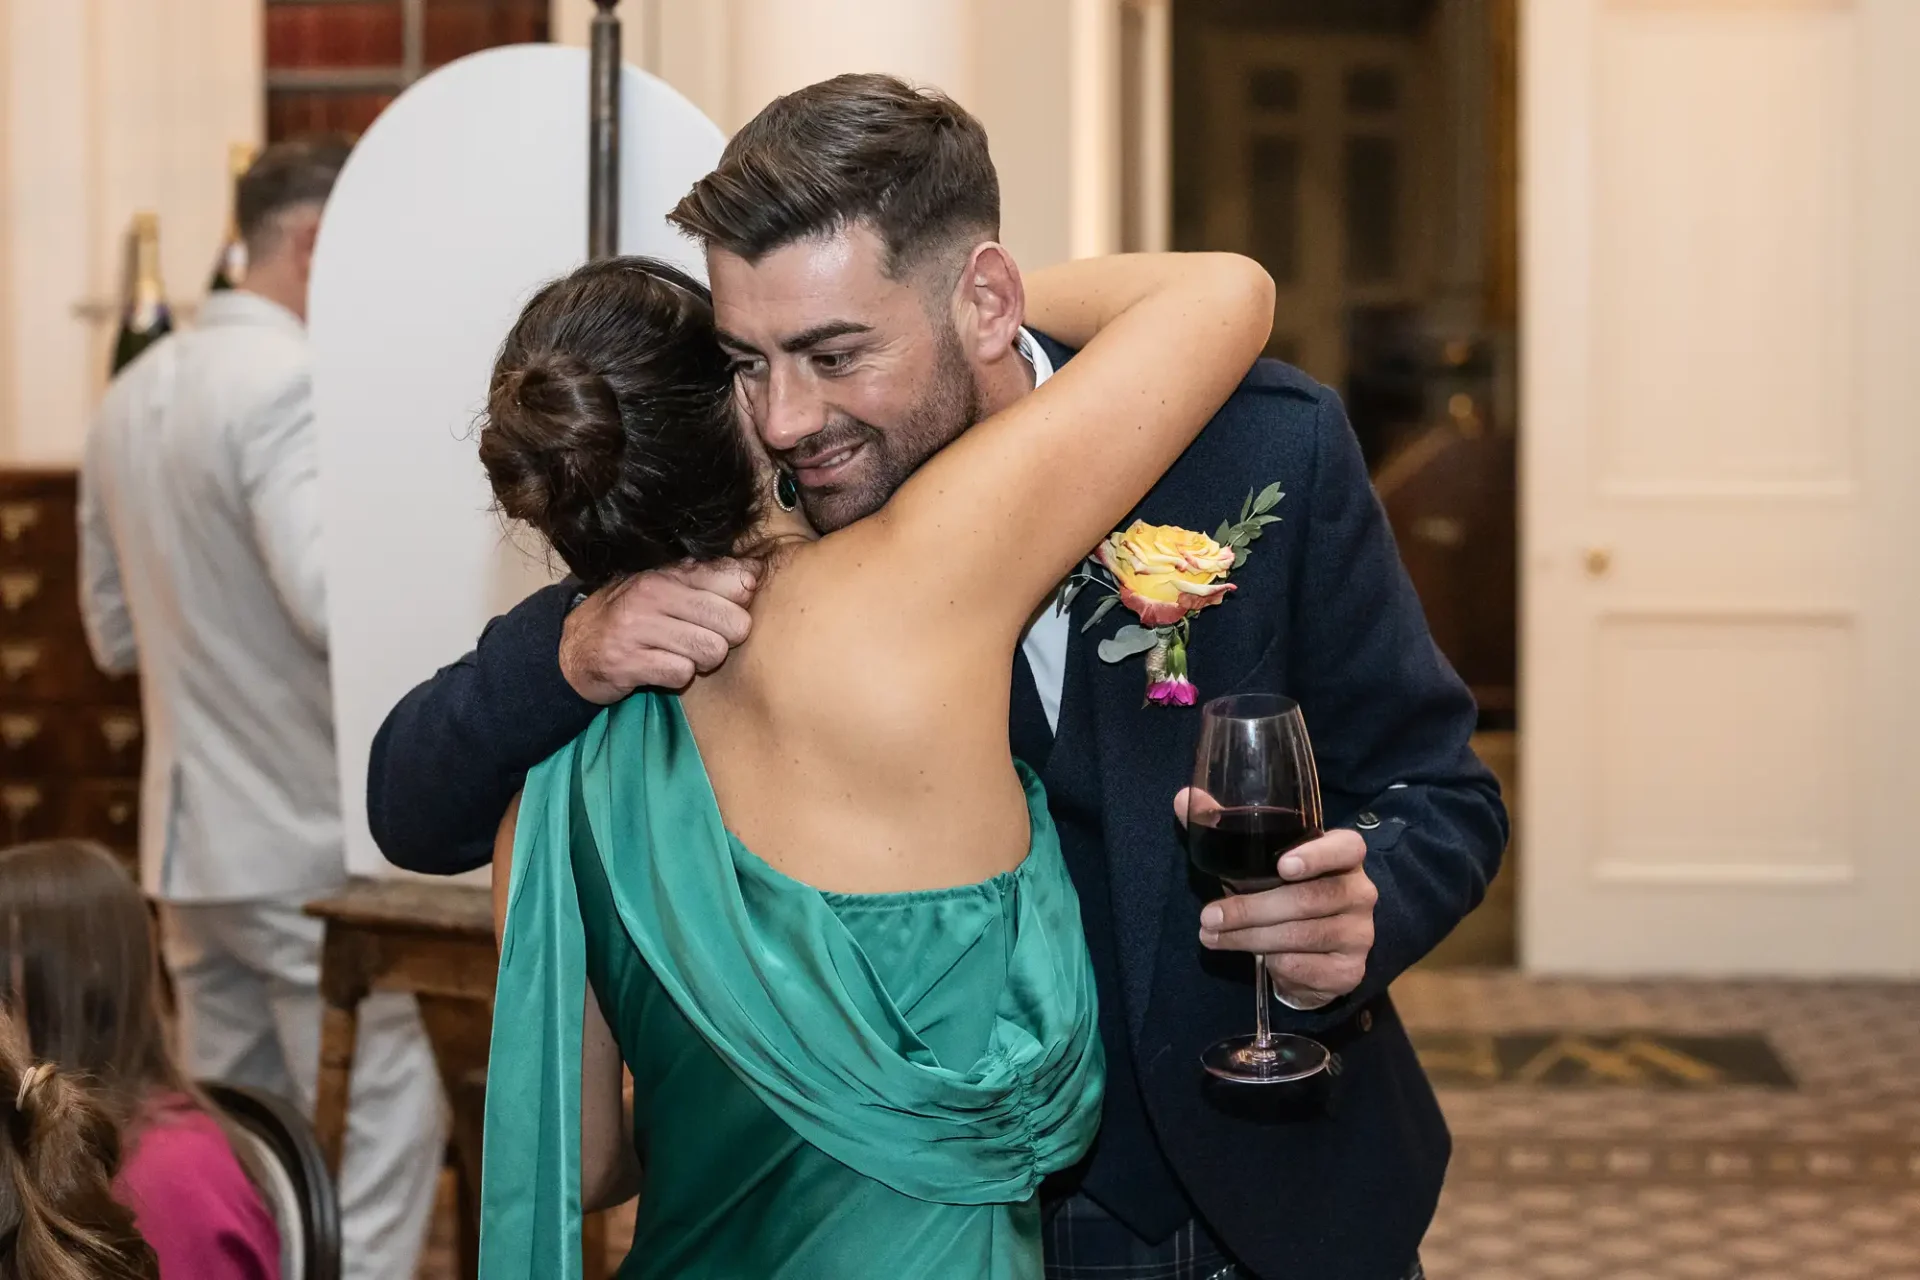 Man in a suit hugs a woman in a green dress at a formal event, holding a glass of red wine.